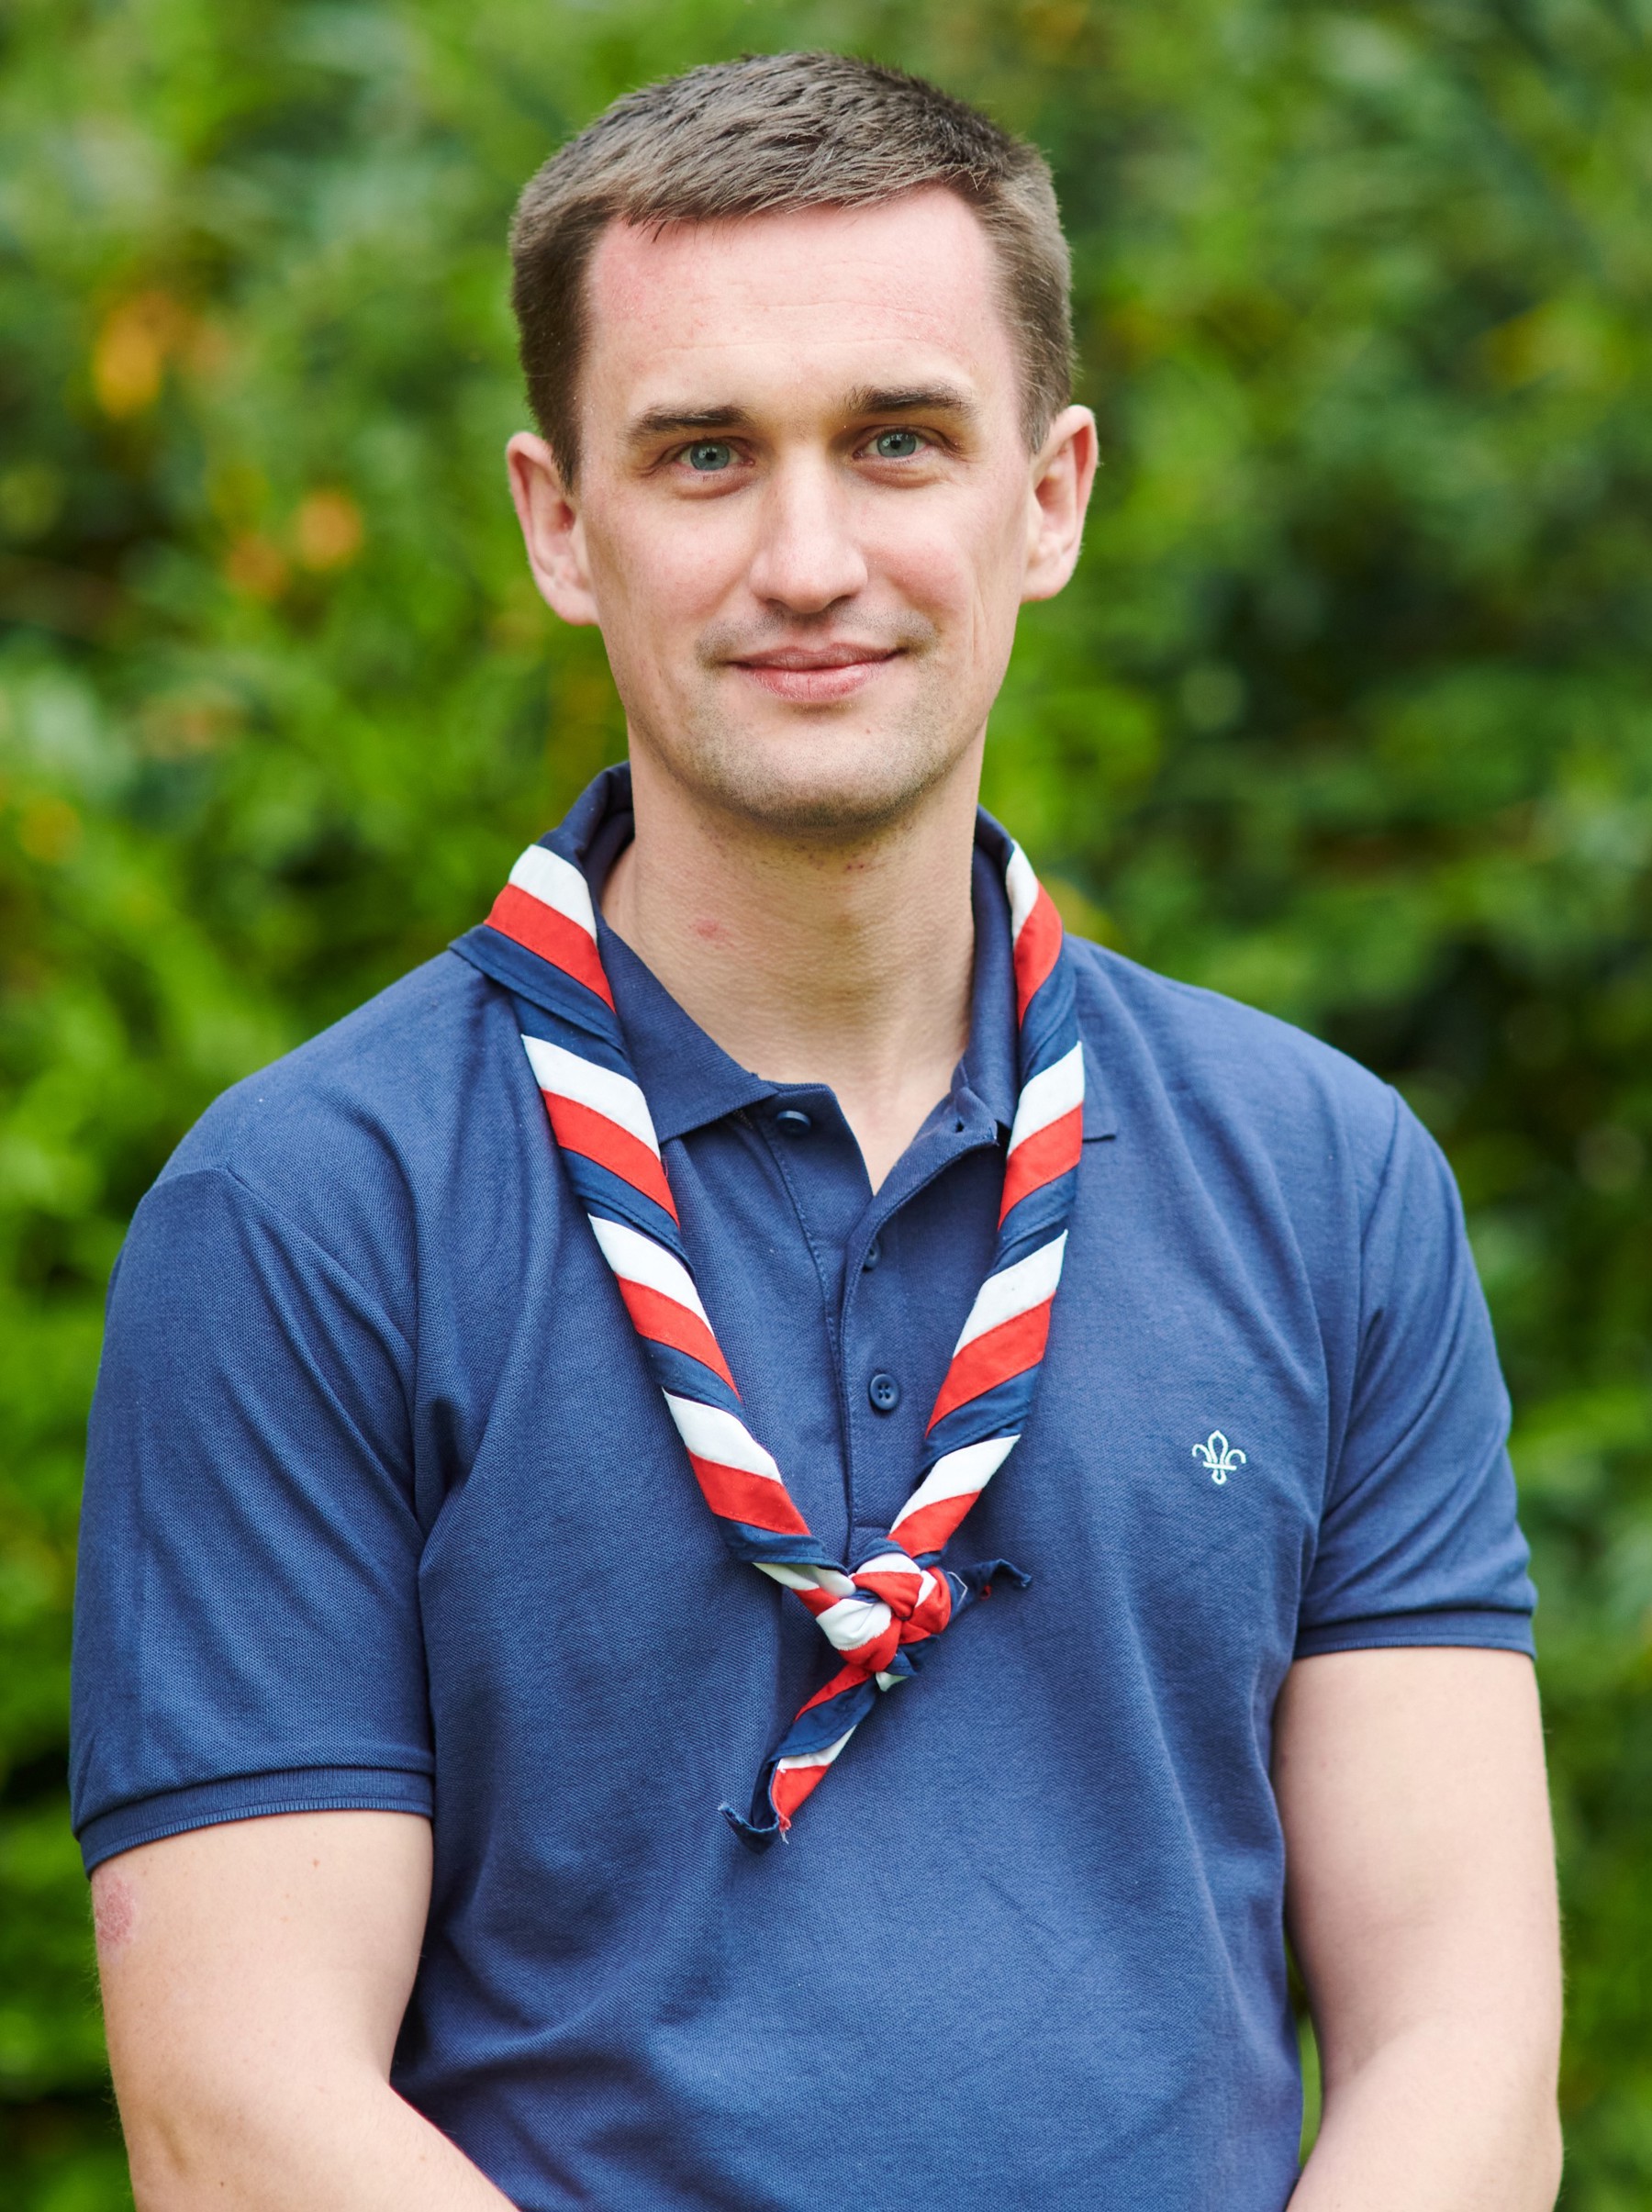 Callum Kaye smiling at the camera while wearing a navy Scouts polo shirt and stripy scarf